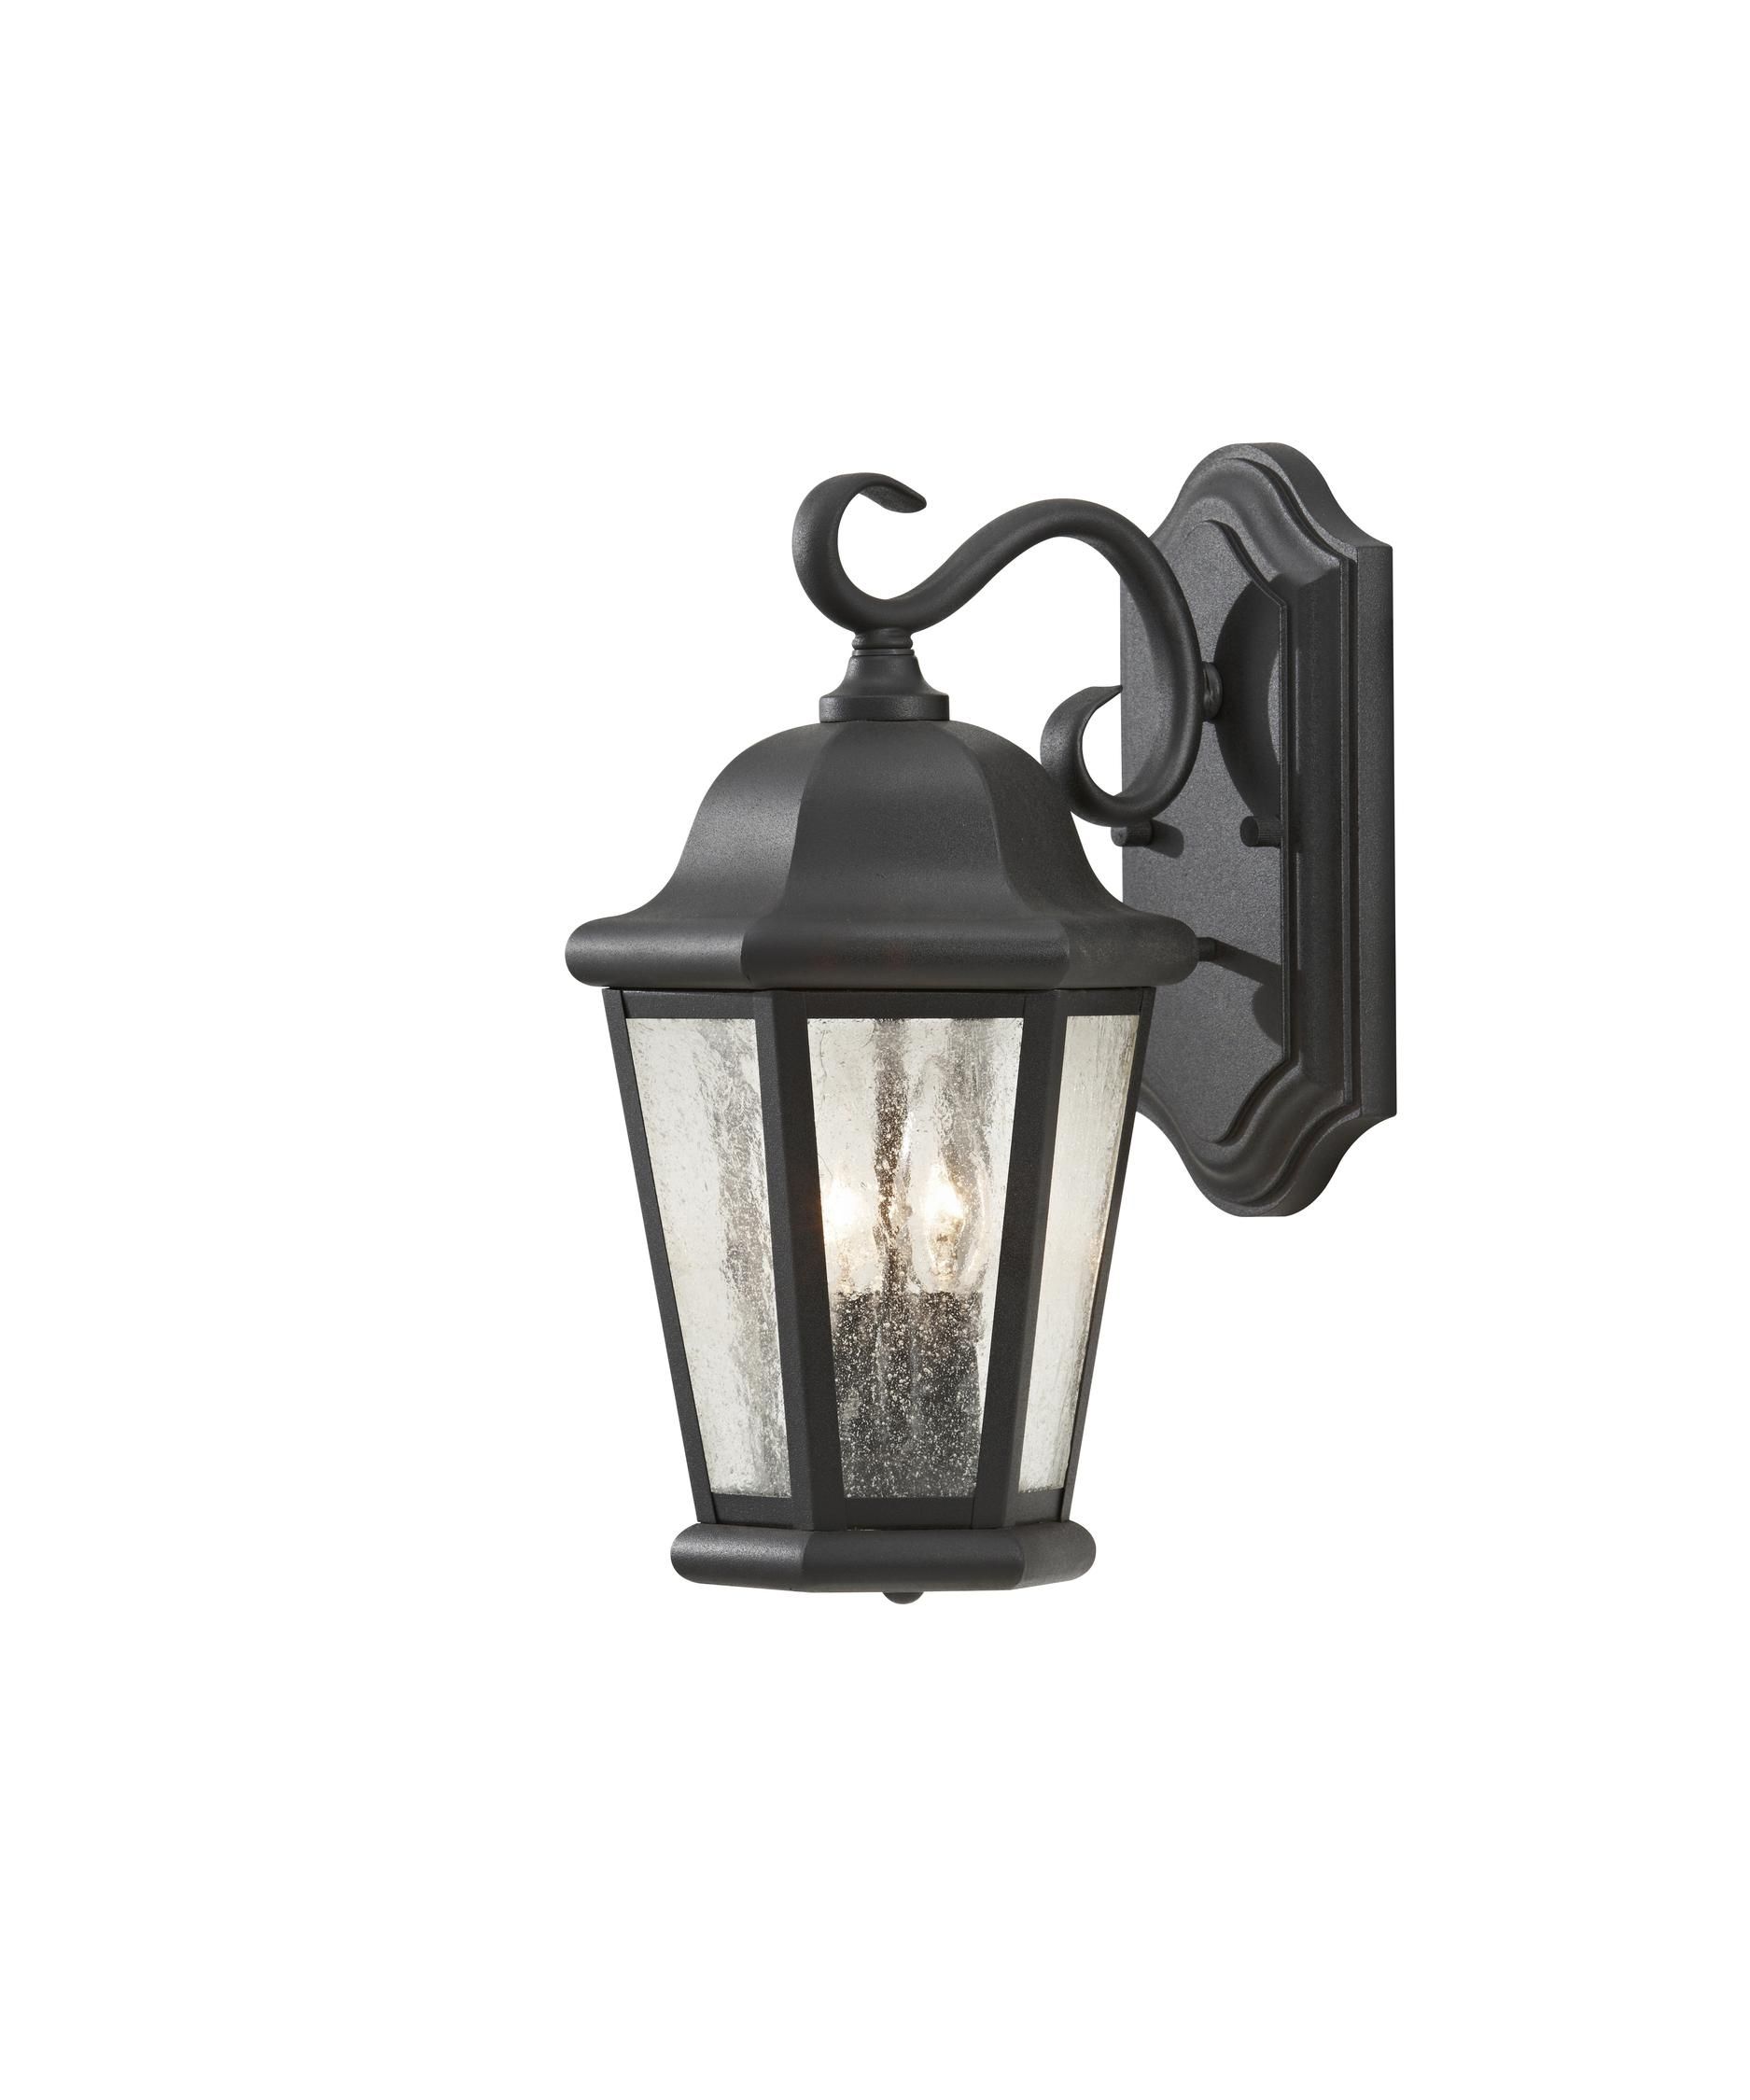 Murray Feiss Ol5901 Martinsville 15 Inch Wide 2 Light Outdoor Wall Intended For Outdoor Wall Lighting With Seeded Glass (Photo 4 of 15)